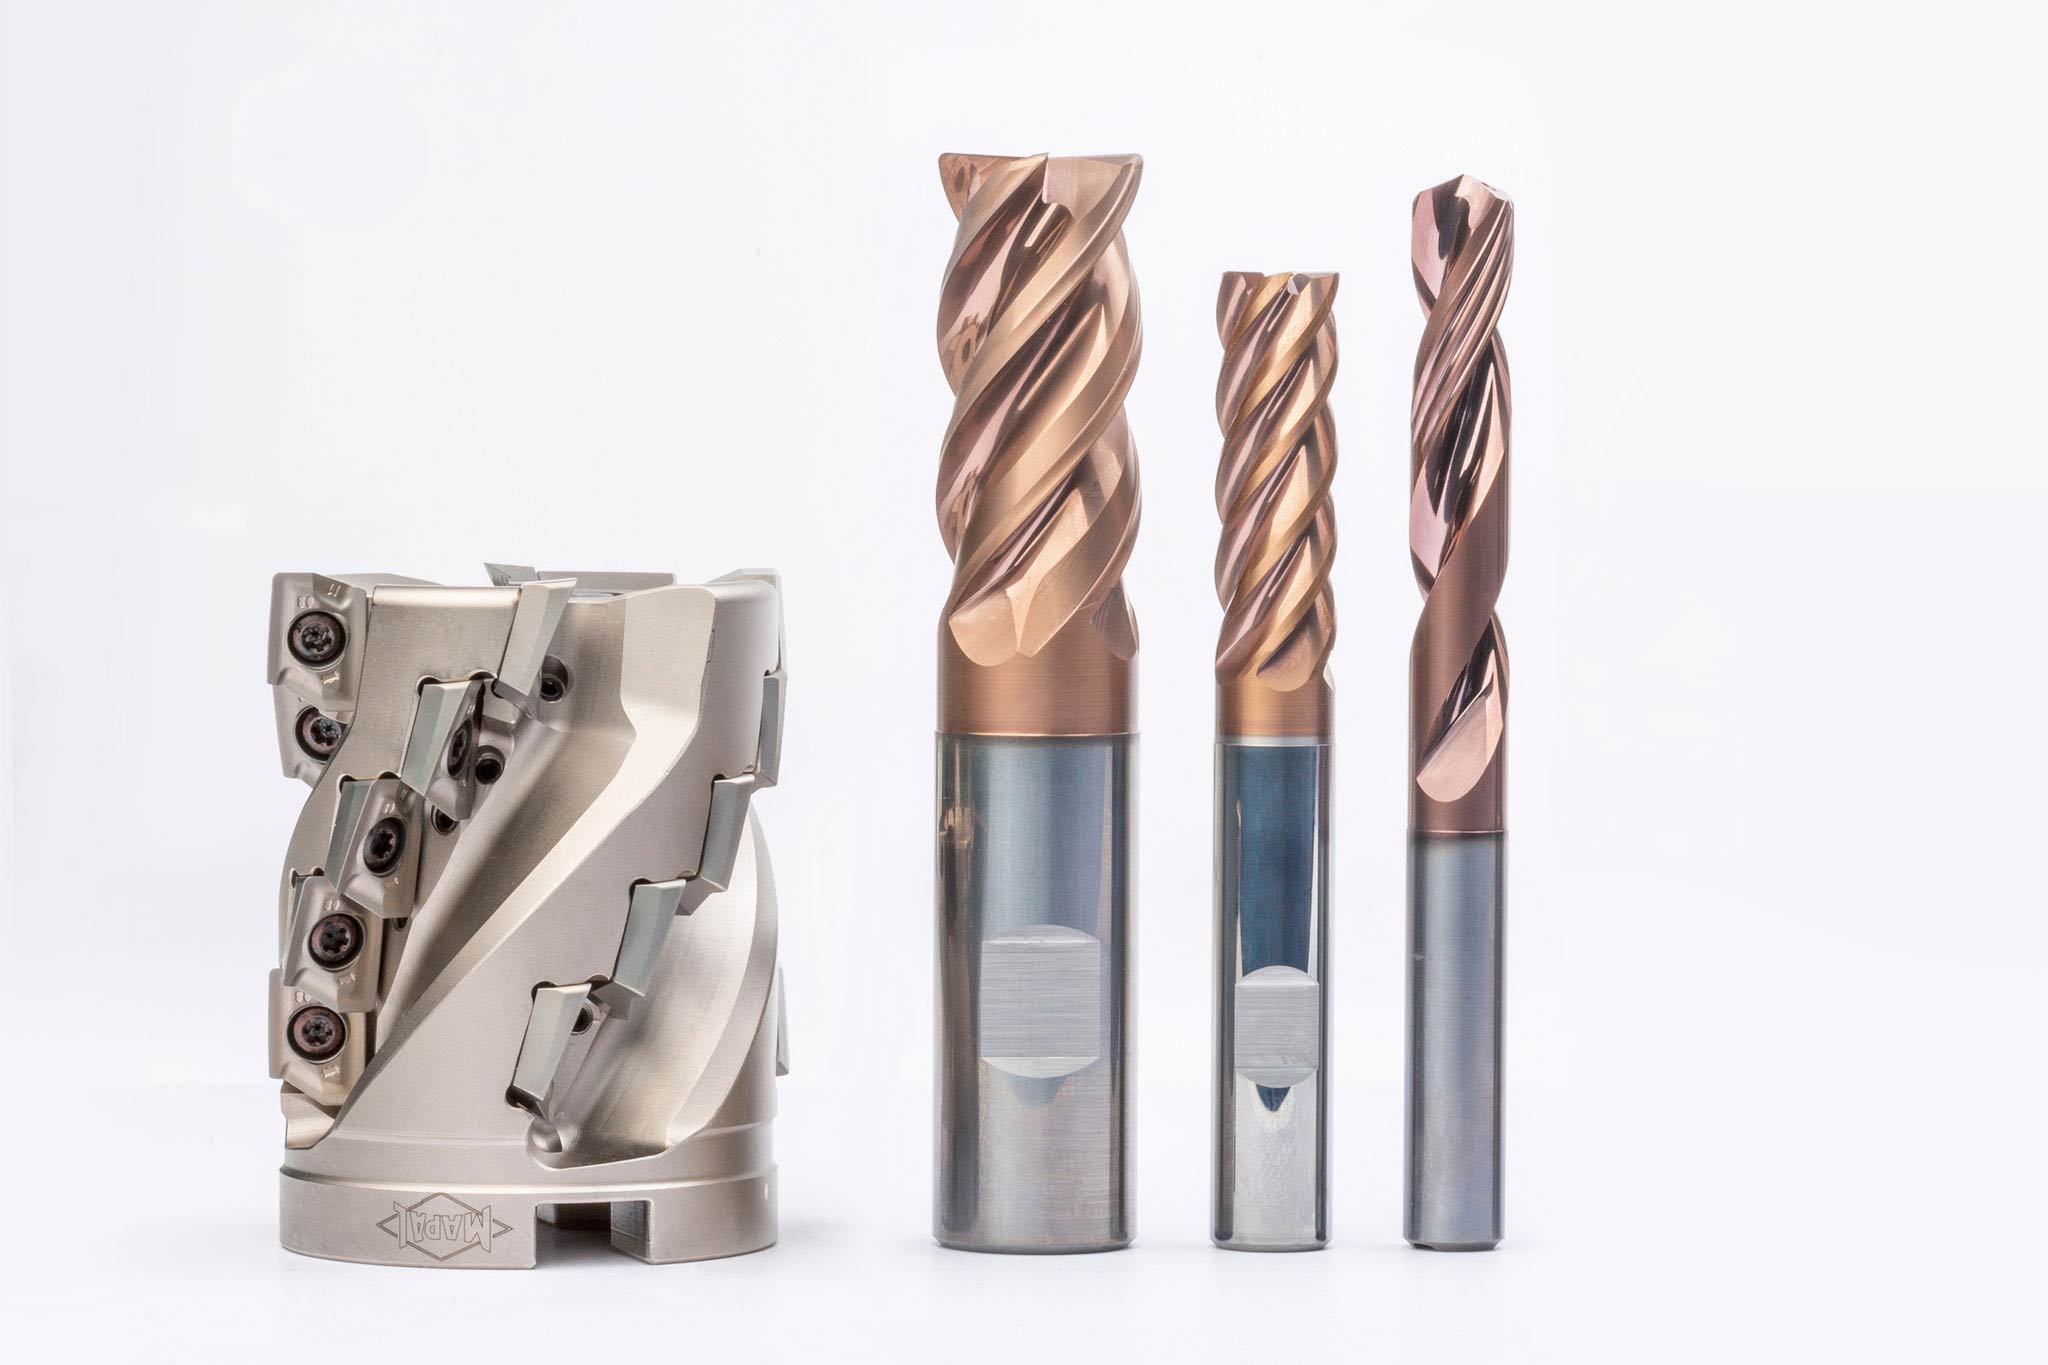 The picture shows from left to right the NeoMill-Titan, two OptiMill-Titan-HPC solid carbide cutters and a MEGA-Speed-Drill-Titan solid carbide drill.